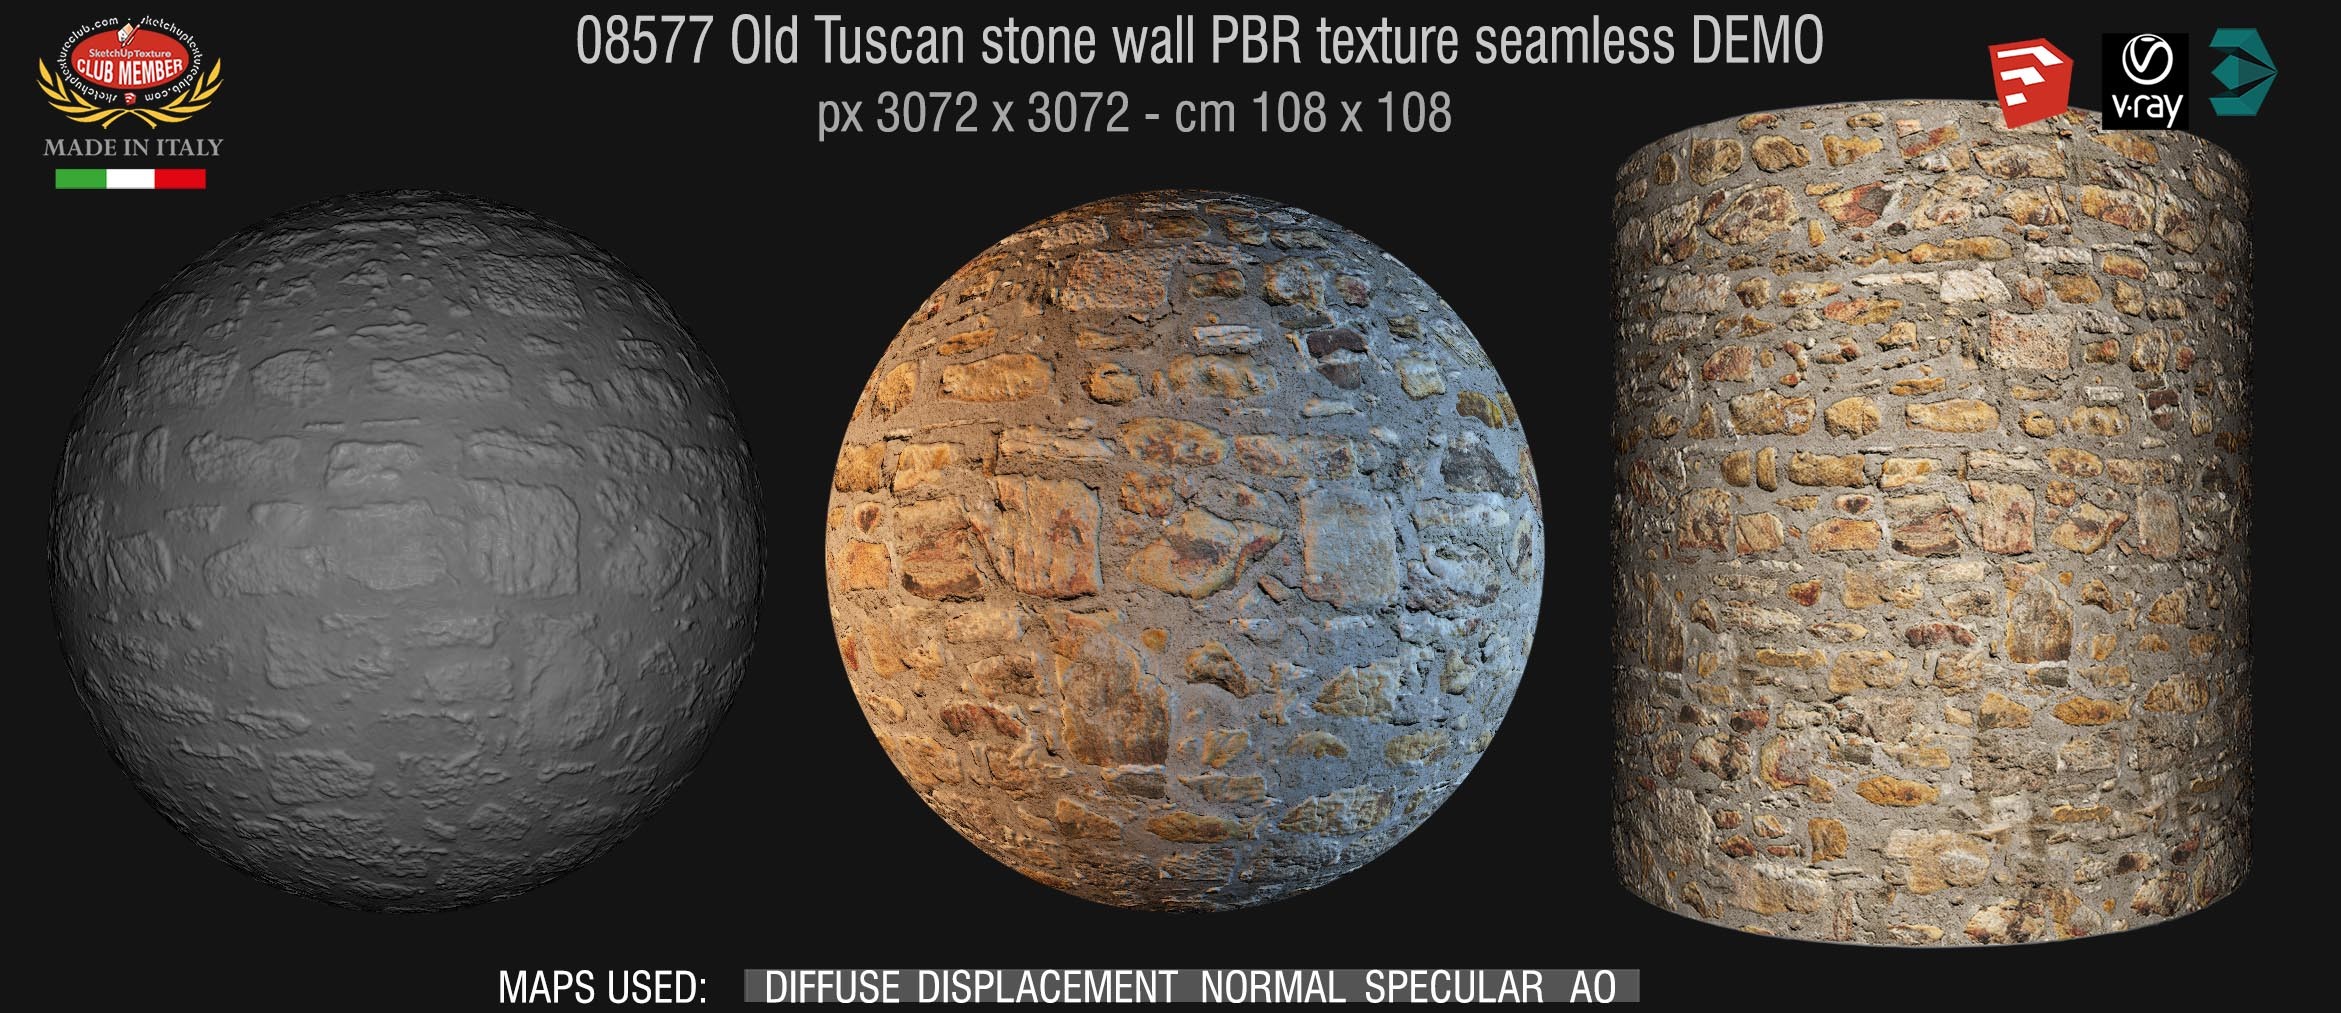 08577 Old Tuscan stone wall PBR texture seamless DEMO